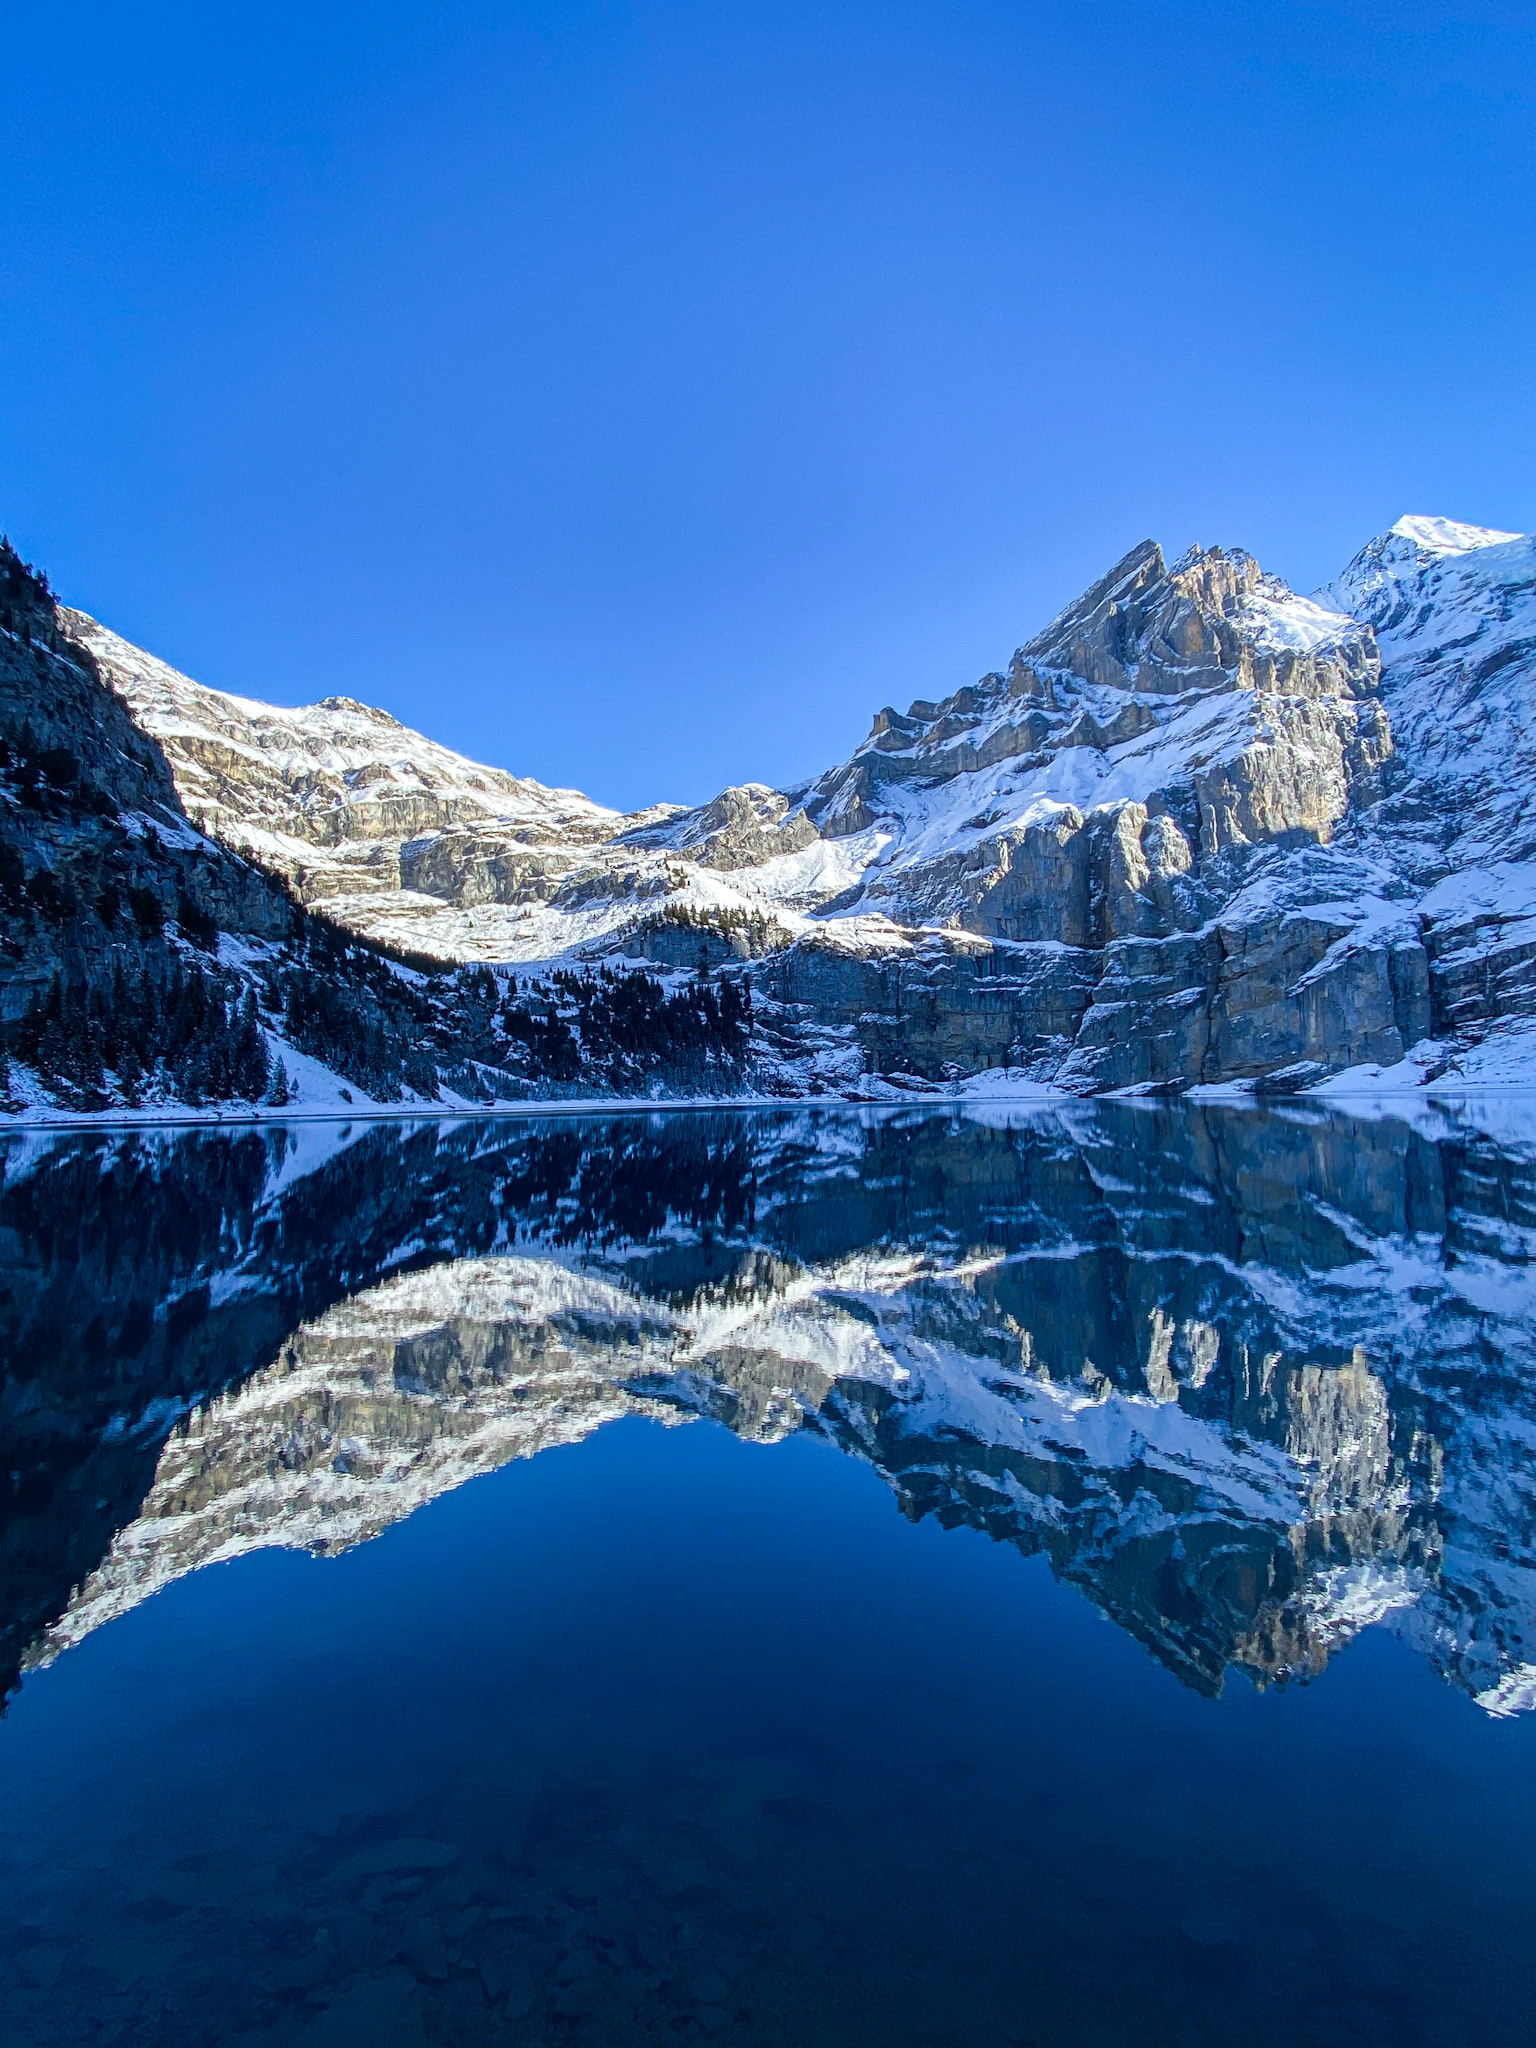 Oeschinensee in winter with snowy mountains reflected in the lake